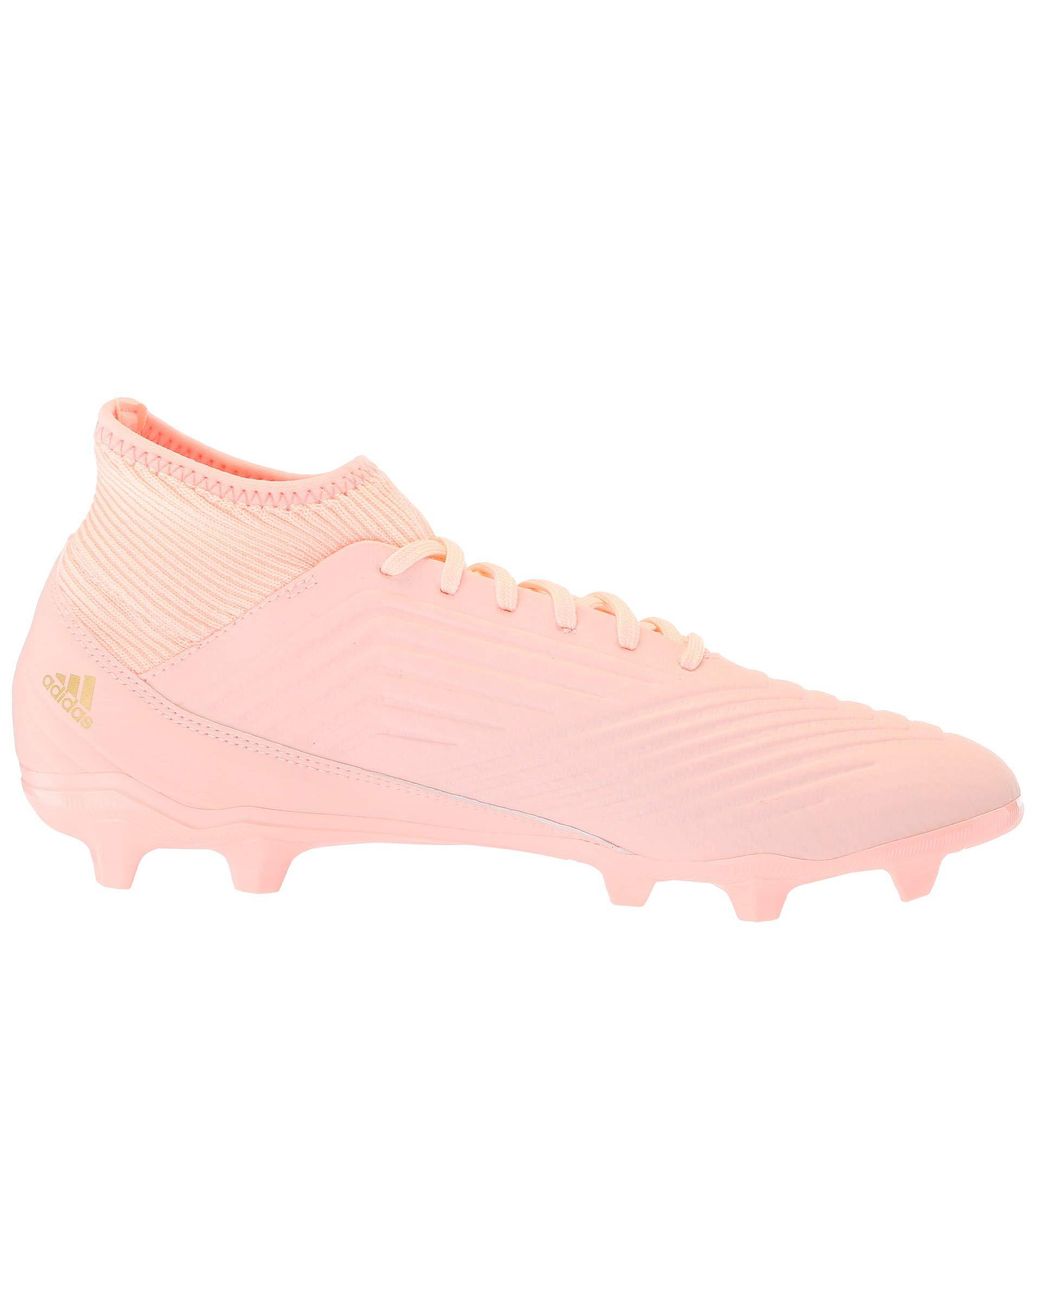 adidas Predator 18.3 Fg World Cup Pack (clear Orange/clear Orange/trace Pink)  Men's Soccer Shoes for Men | Lyst